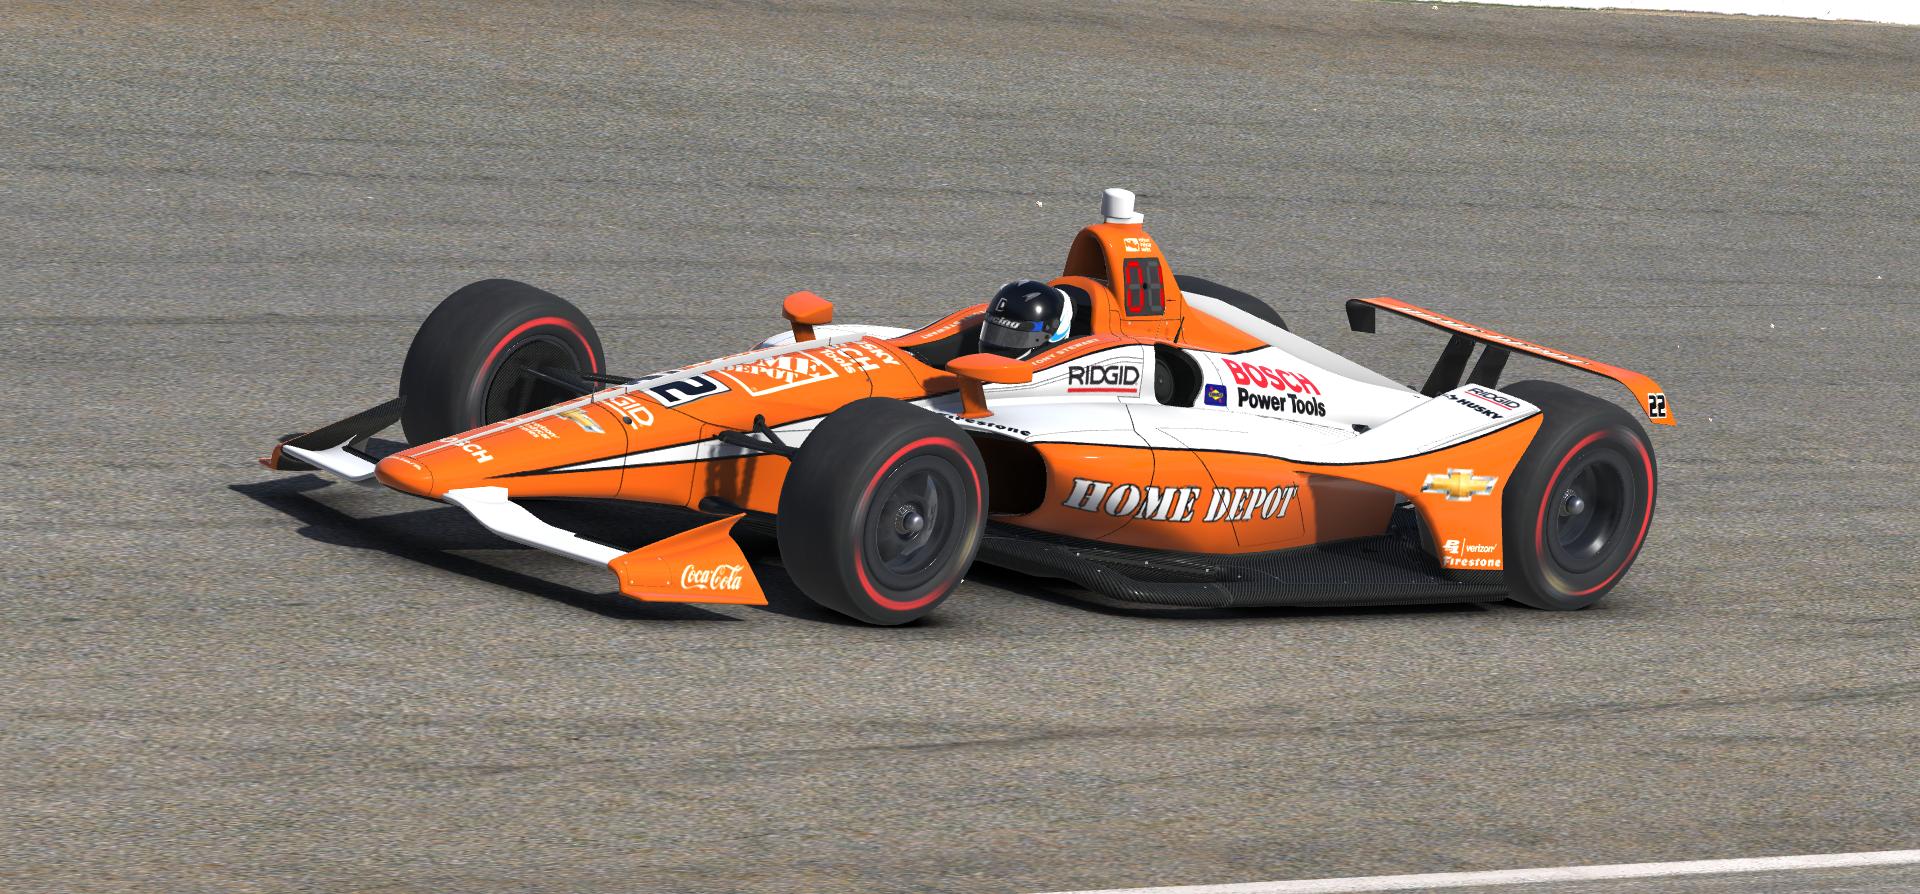 Preview of Tony Stewart 1999 Home Depot Indy 500 Car by Doug DeNise